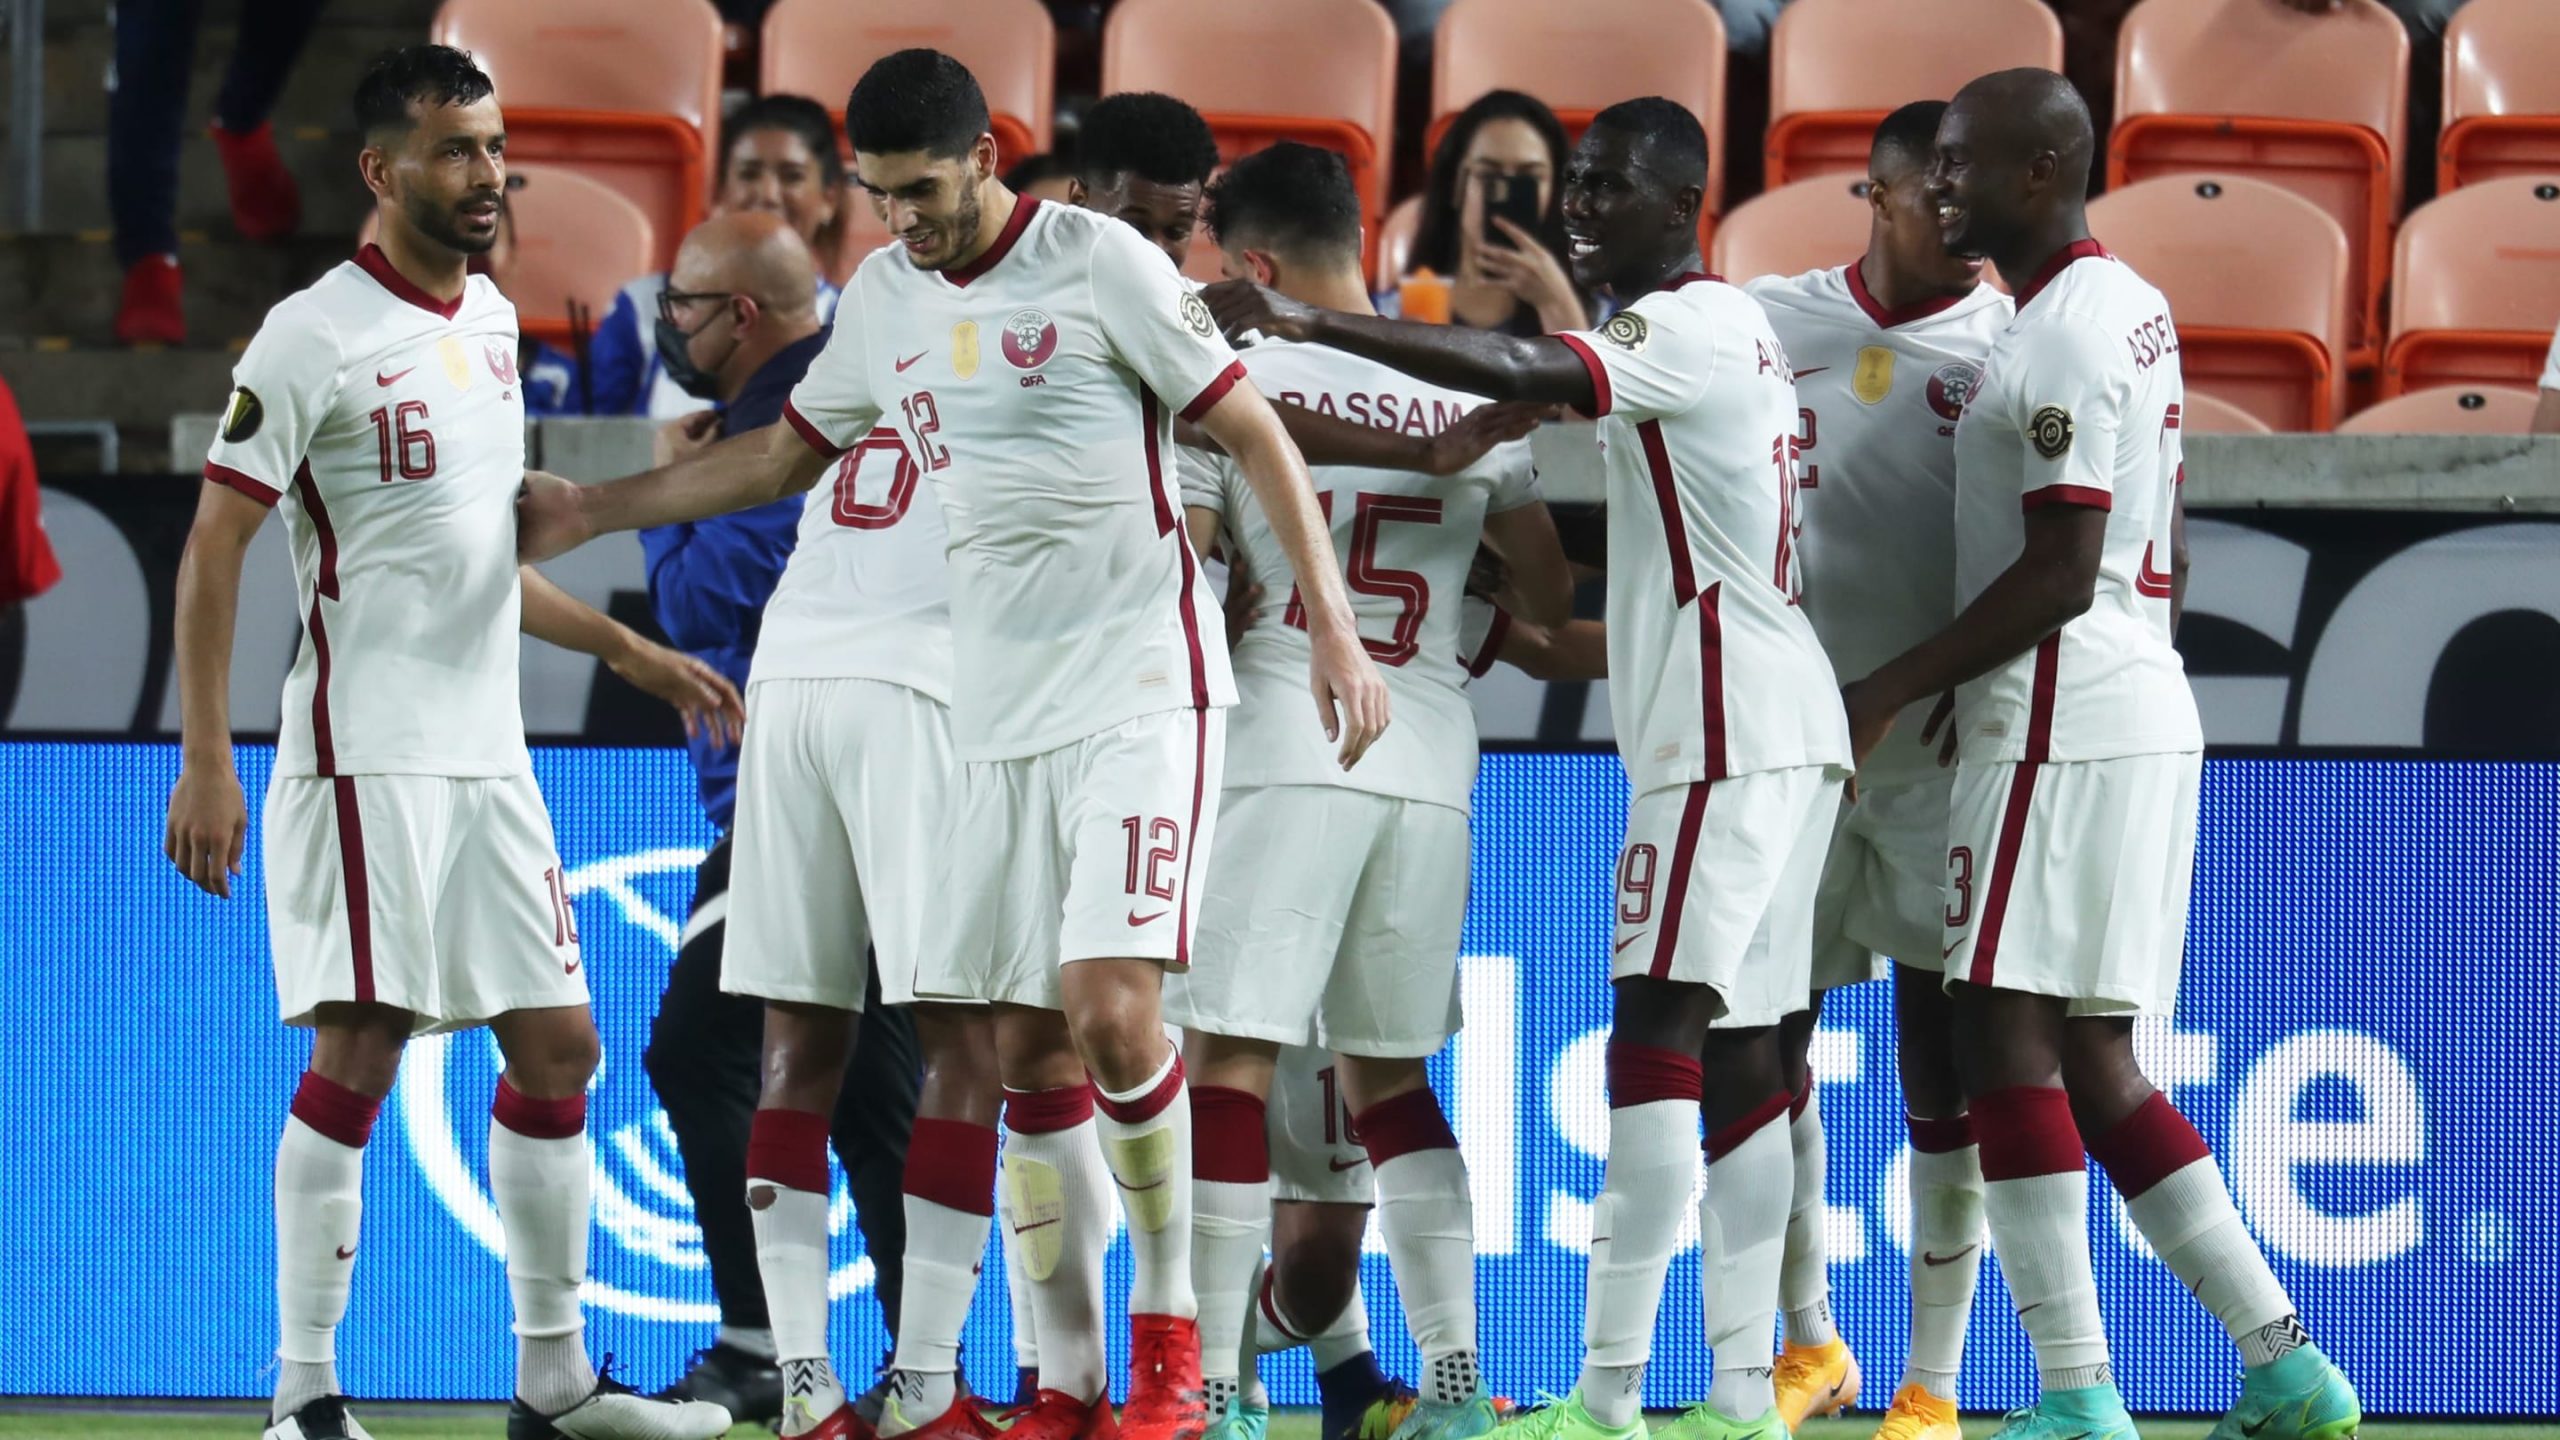 International News Papers Praise Qatar in The 2021 Golden Cup